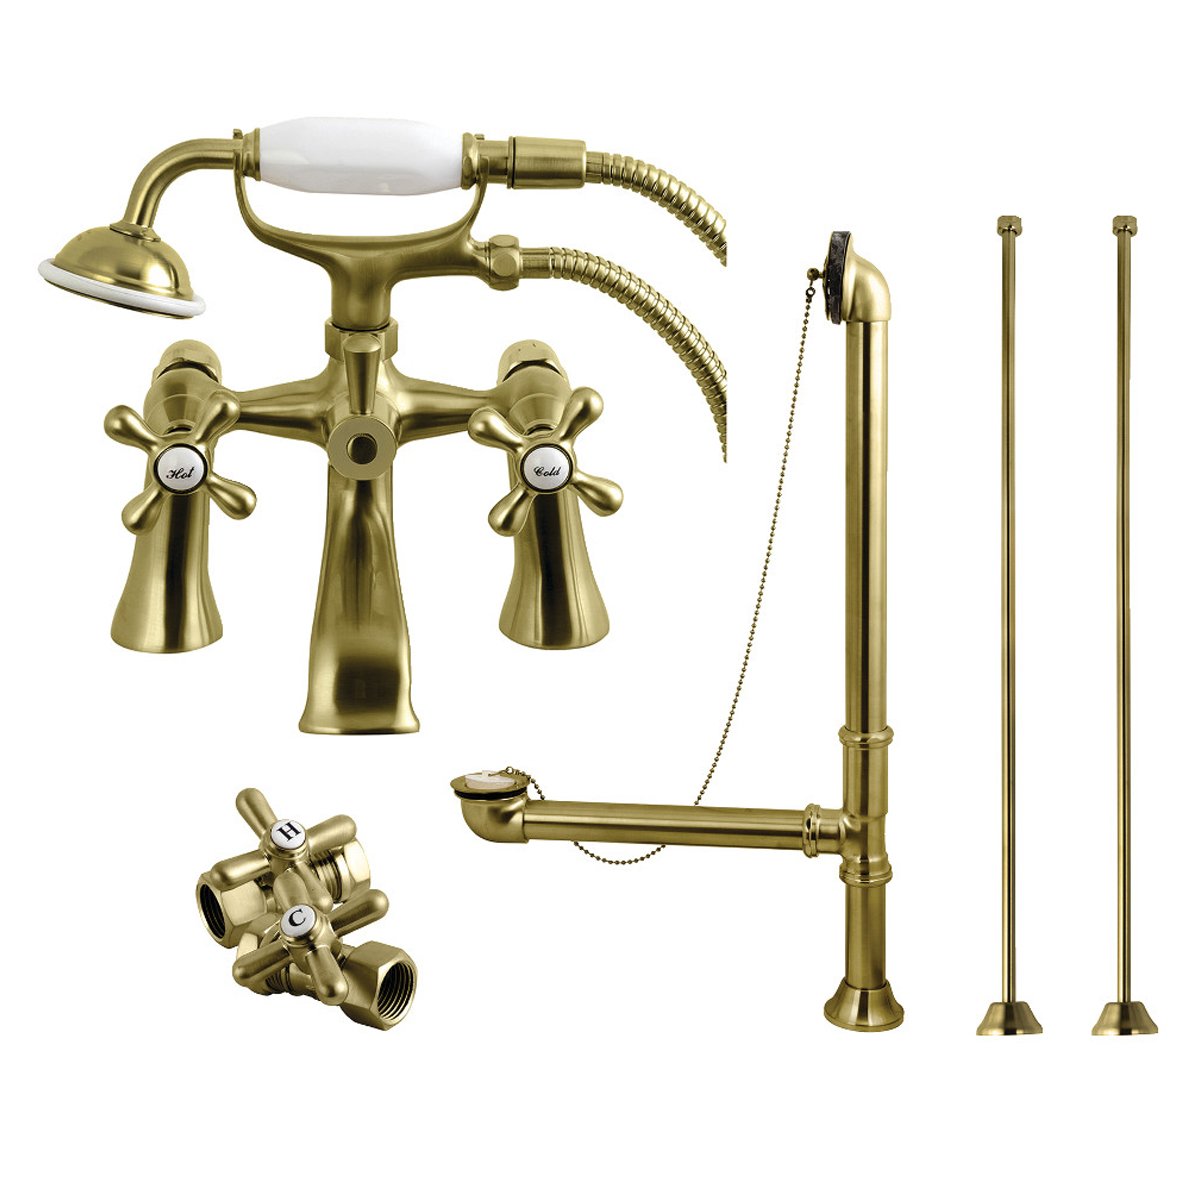 Kingston Brass Vintage Deck Mount Clawfoot Tub Faucet Package